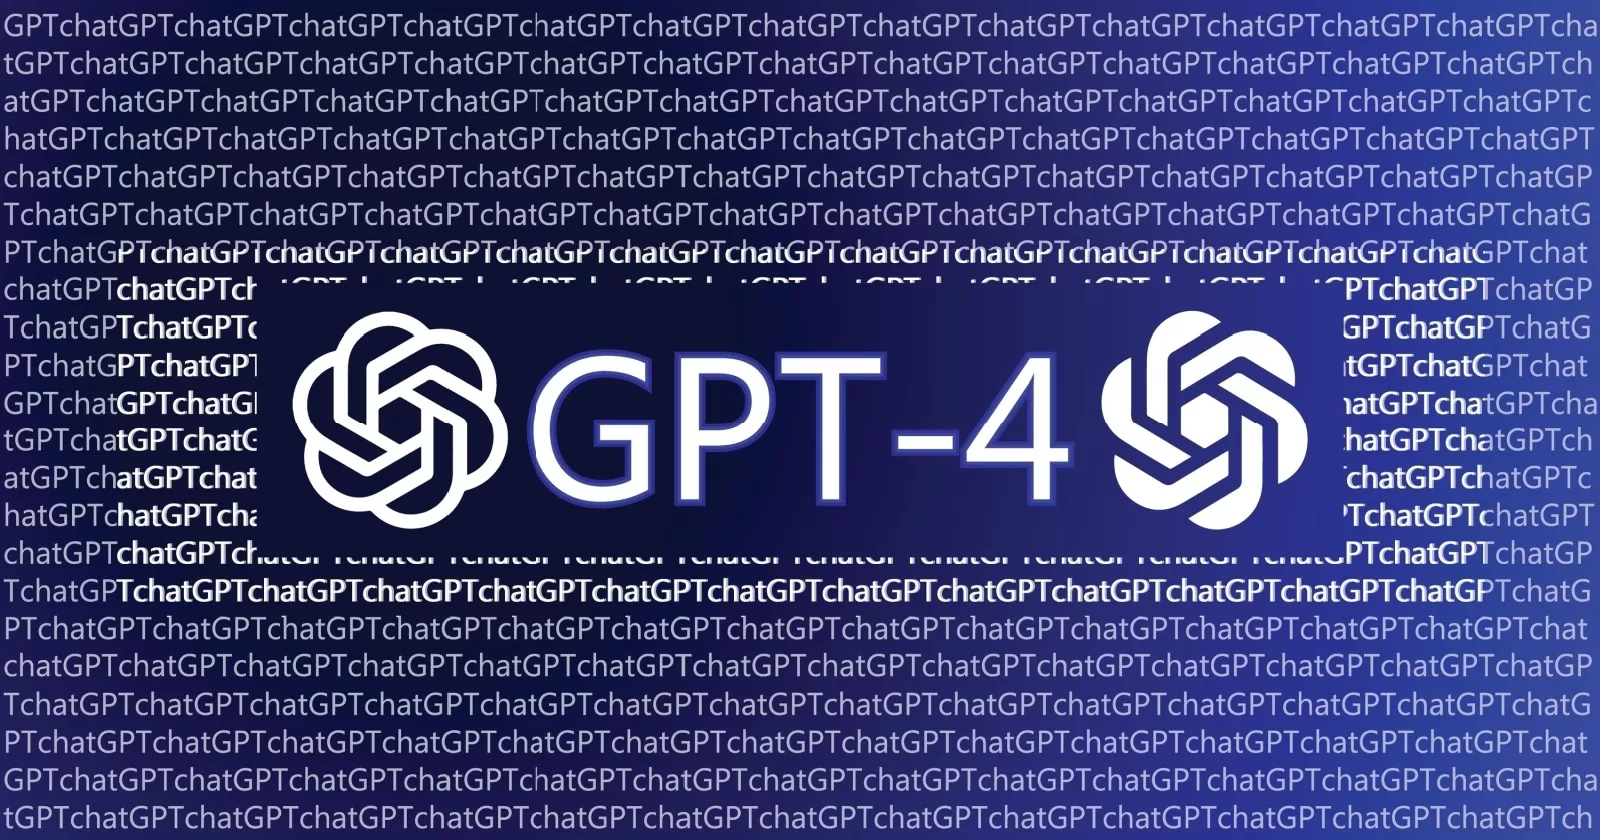 GPT-4 will take OpenAI ChatGPT to the next level